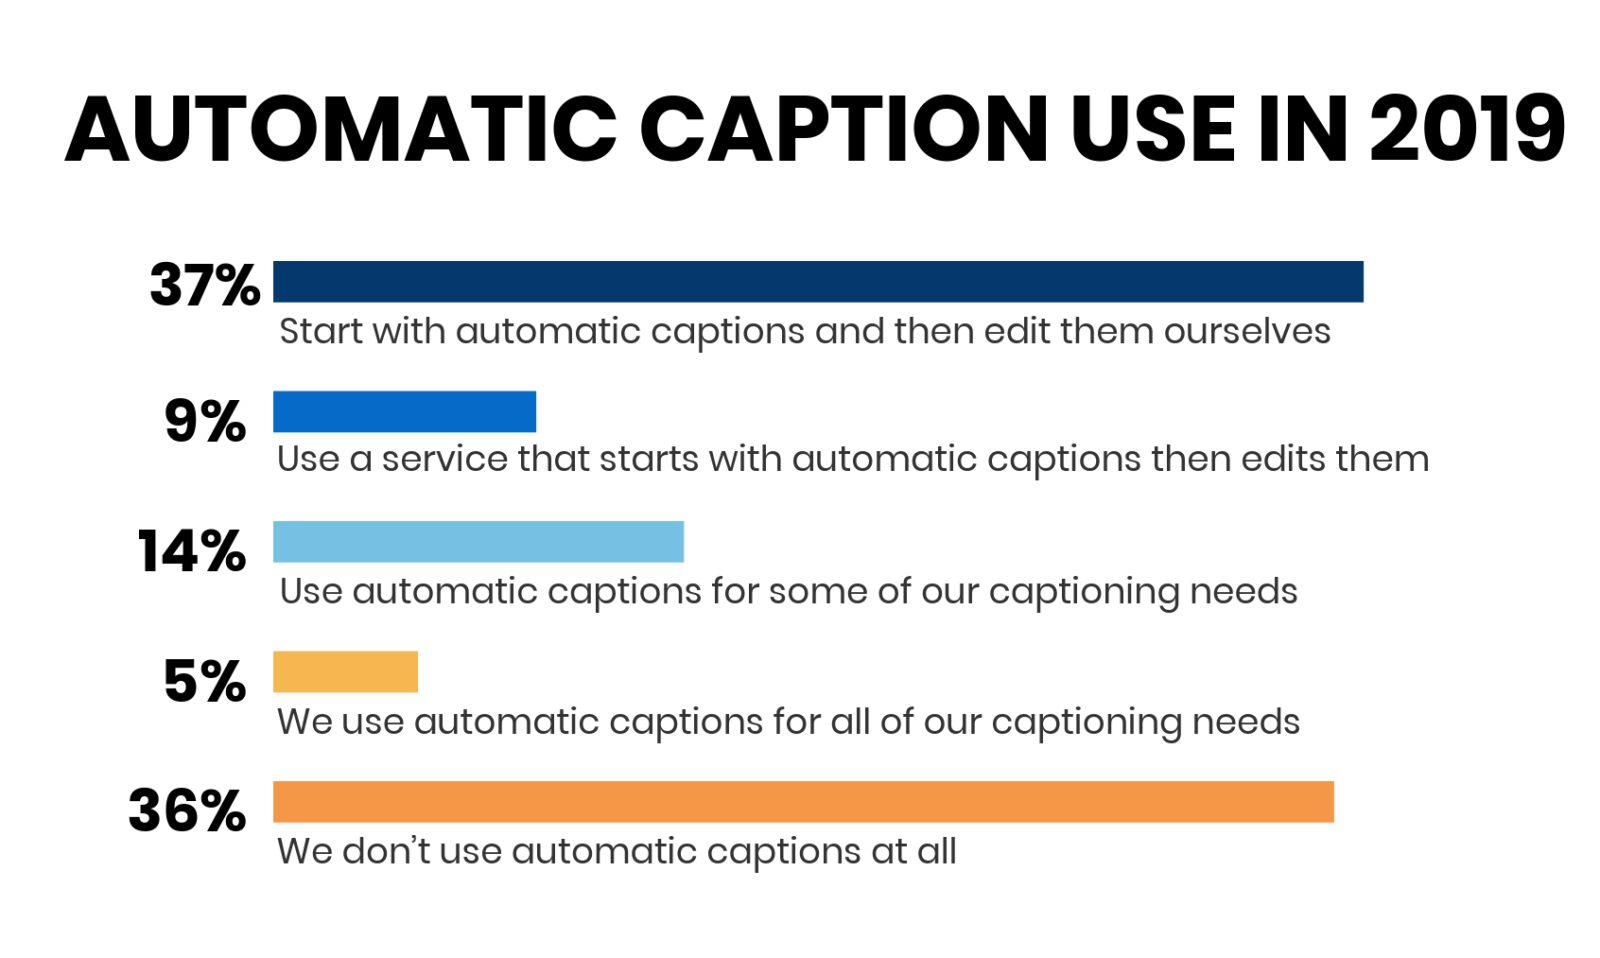 Automatic caption use in 2019: Start with automatic captions and then edit them ourselves (37%) Use a service that starts with automatic captions then edits them (9%) Use automatic captions for some of our captioning needs (14%) We use automatic captions for all of our captioning need (5%) We don’t use automatic captions at all (36%)